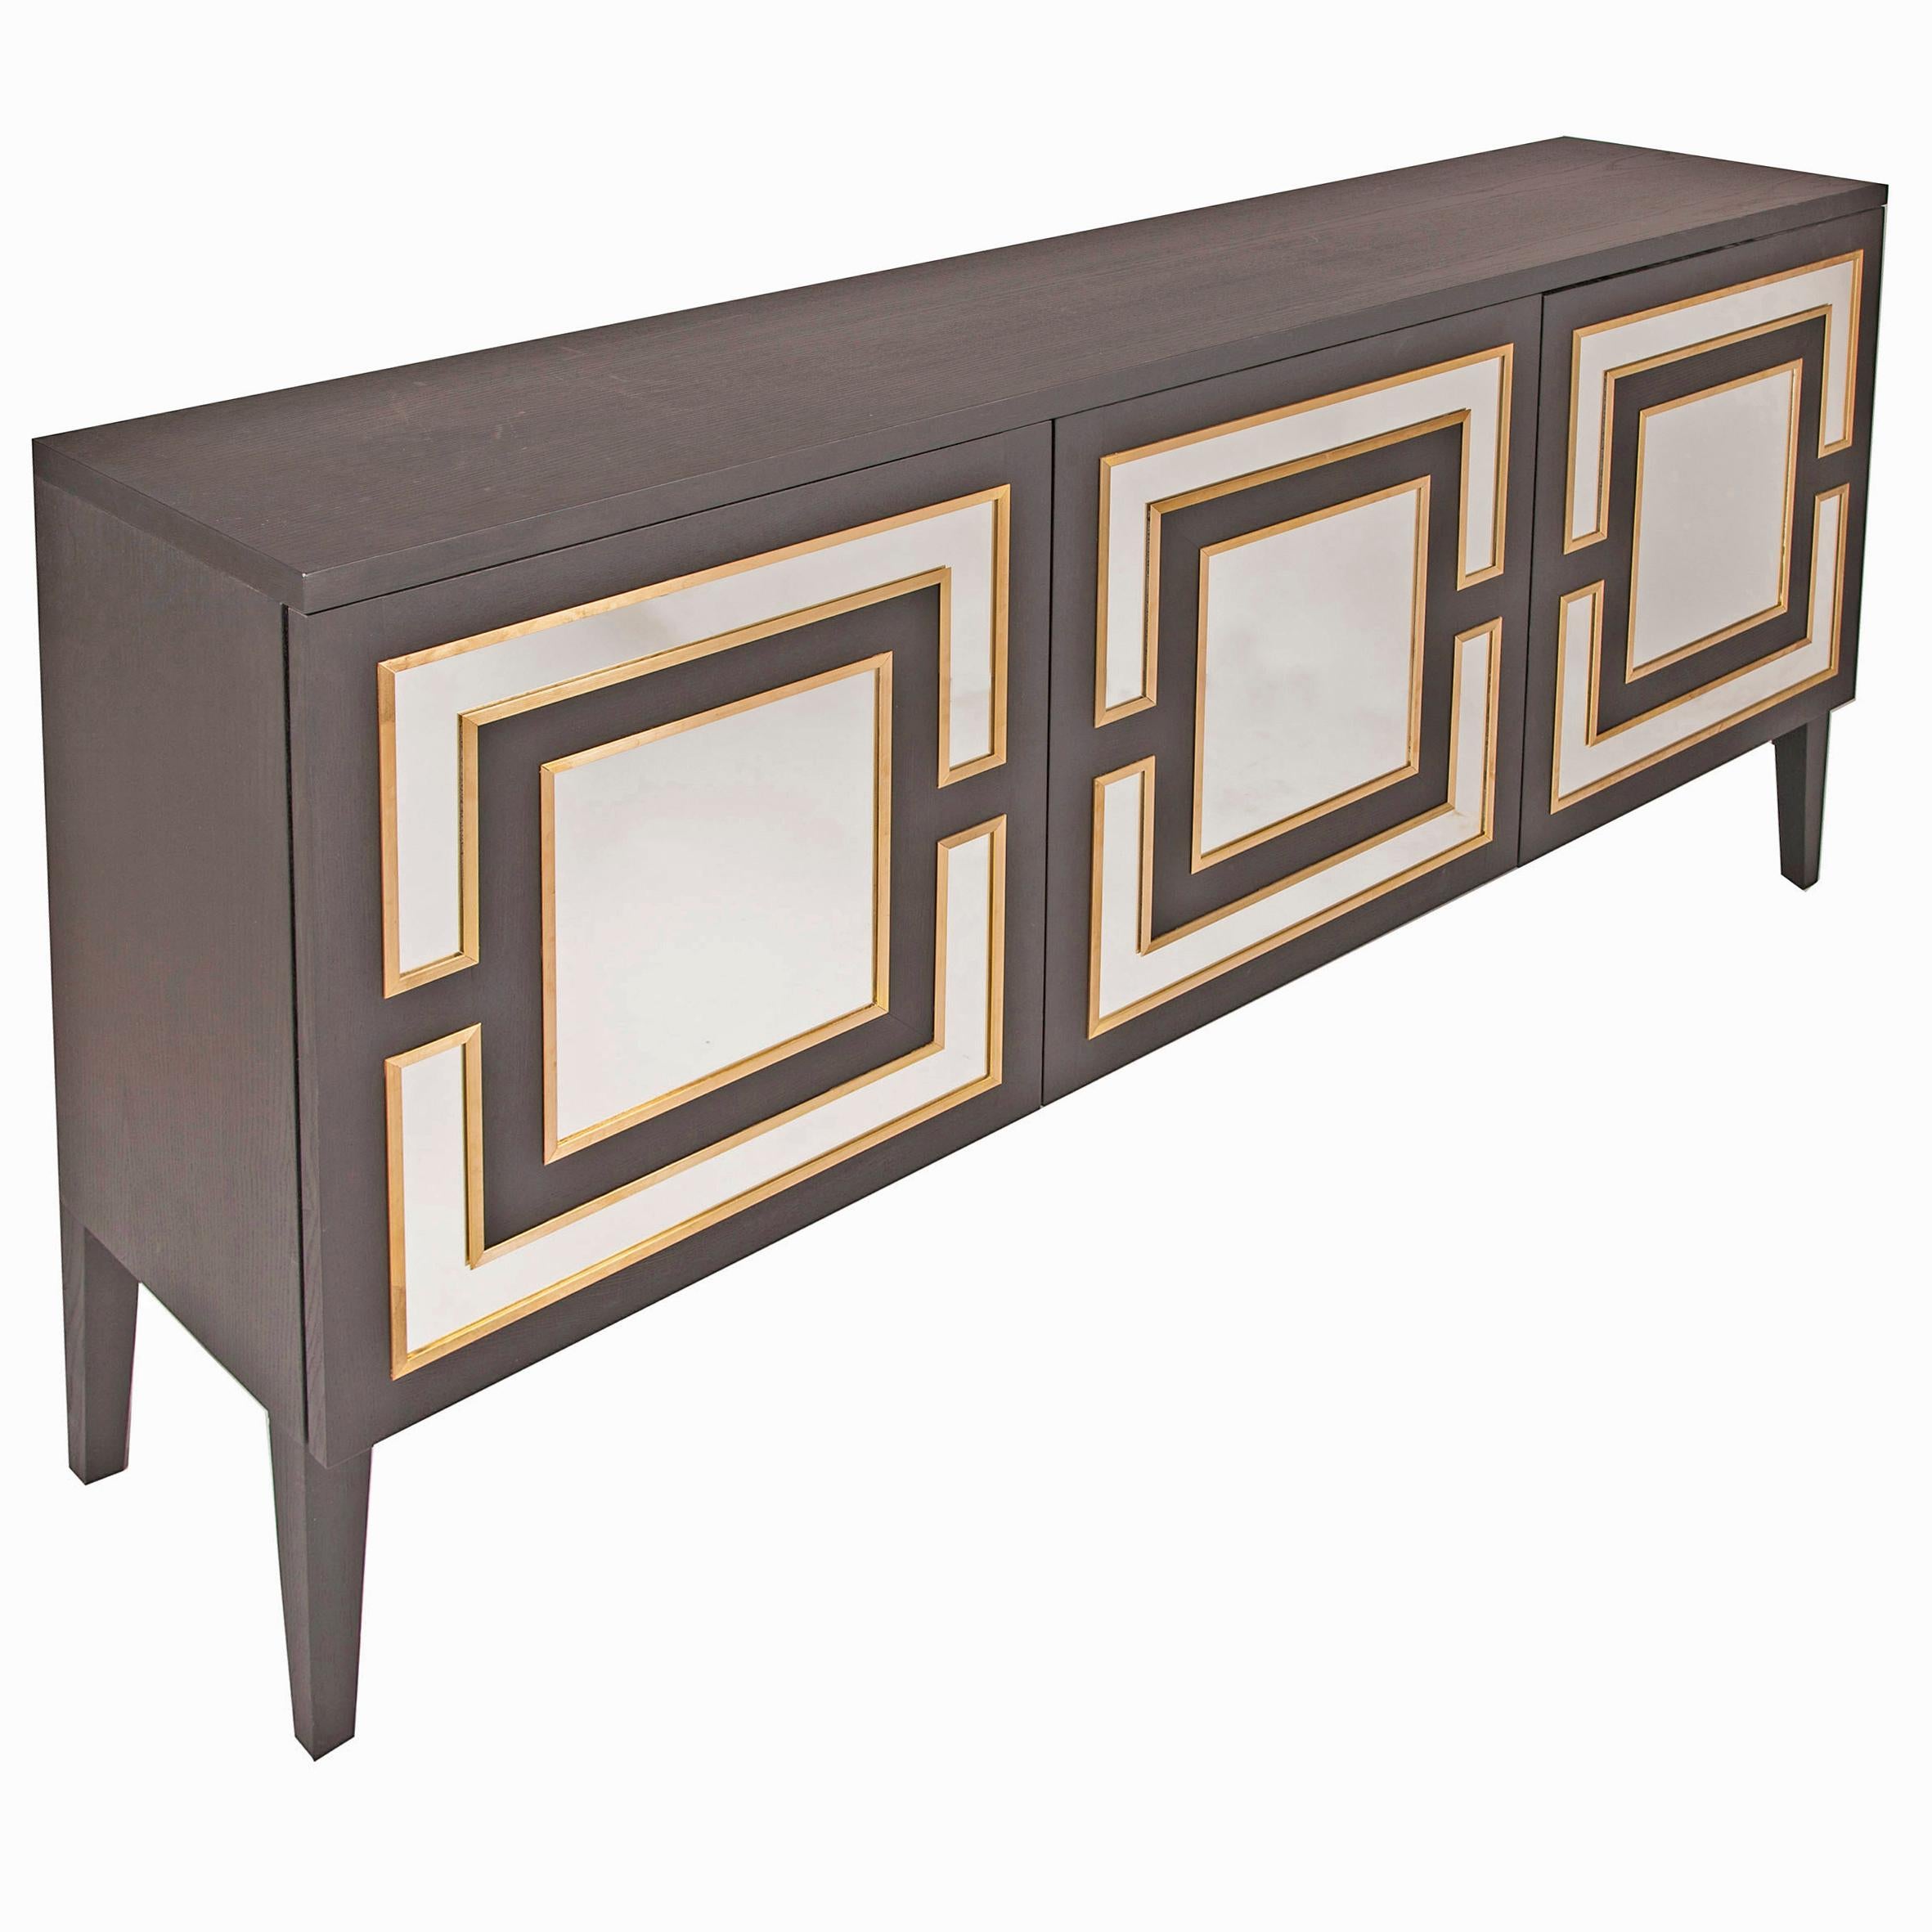 Chocolate stained wood sideboard with push-to-open doors, brass trim and mirror detail. Also available in black (RAL 9004) or white (RAL 9001) satin lacquered colour finish on request.

180W x 40D x 90H cm

1 x ex-display